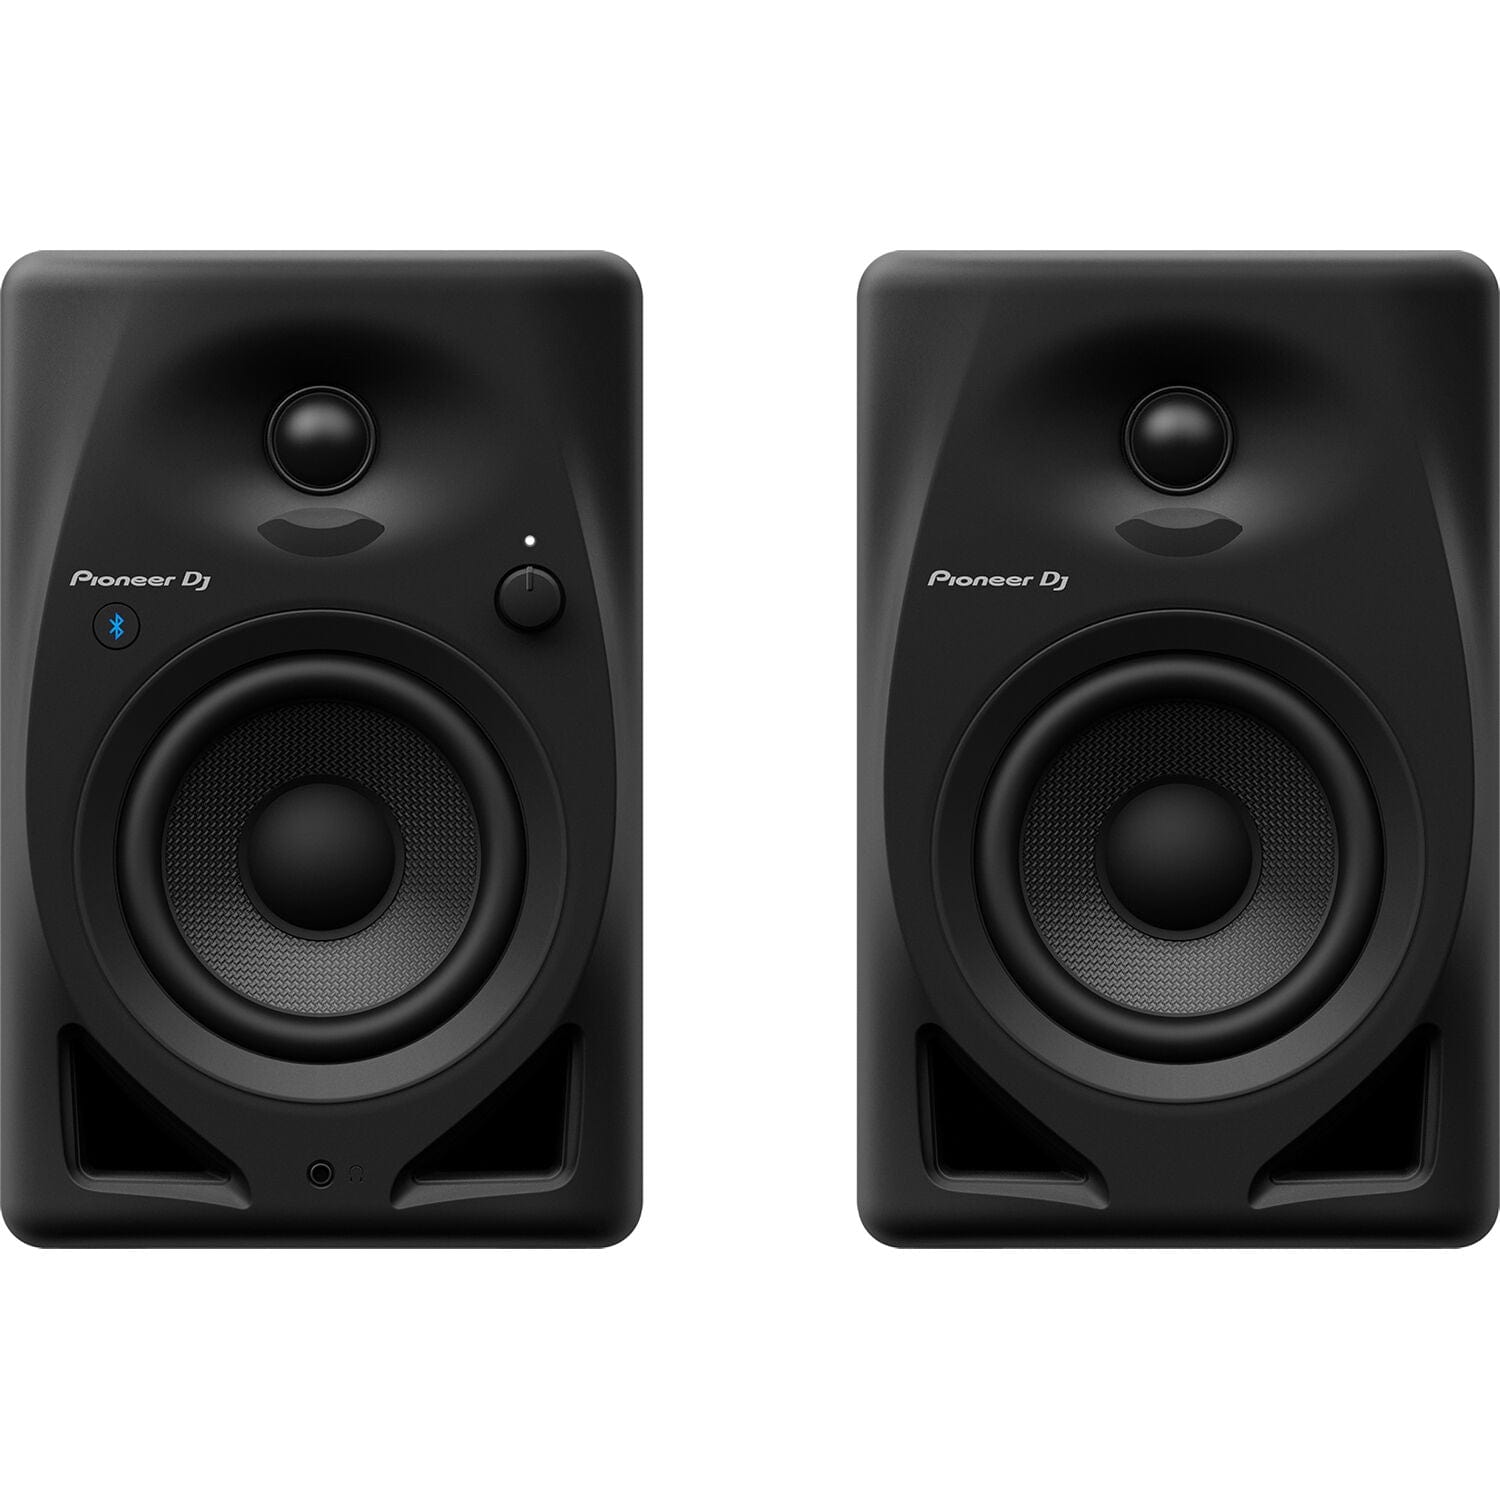 Pioneer DJ DM-40D-BT 4" Two-Way Active Desktop Monitor System with Bluetooth (Pair, Black) - PSSL ProSound and Stage Lighting